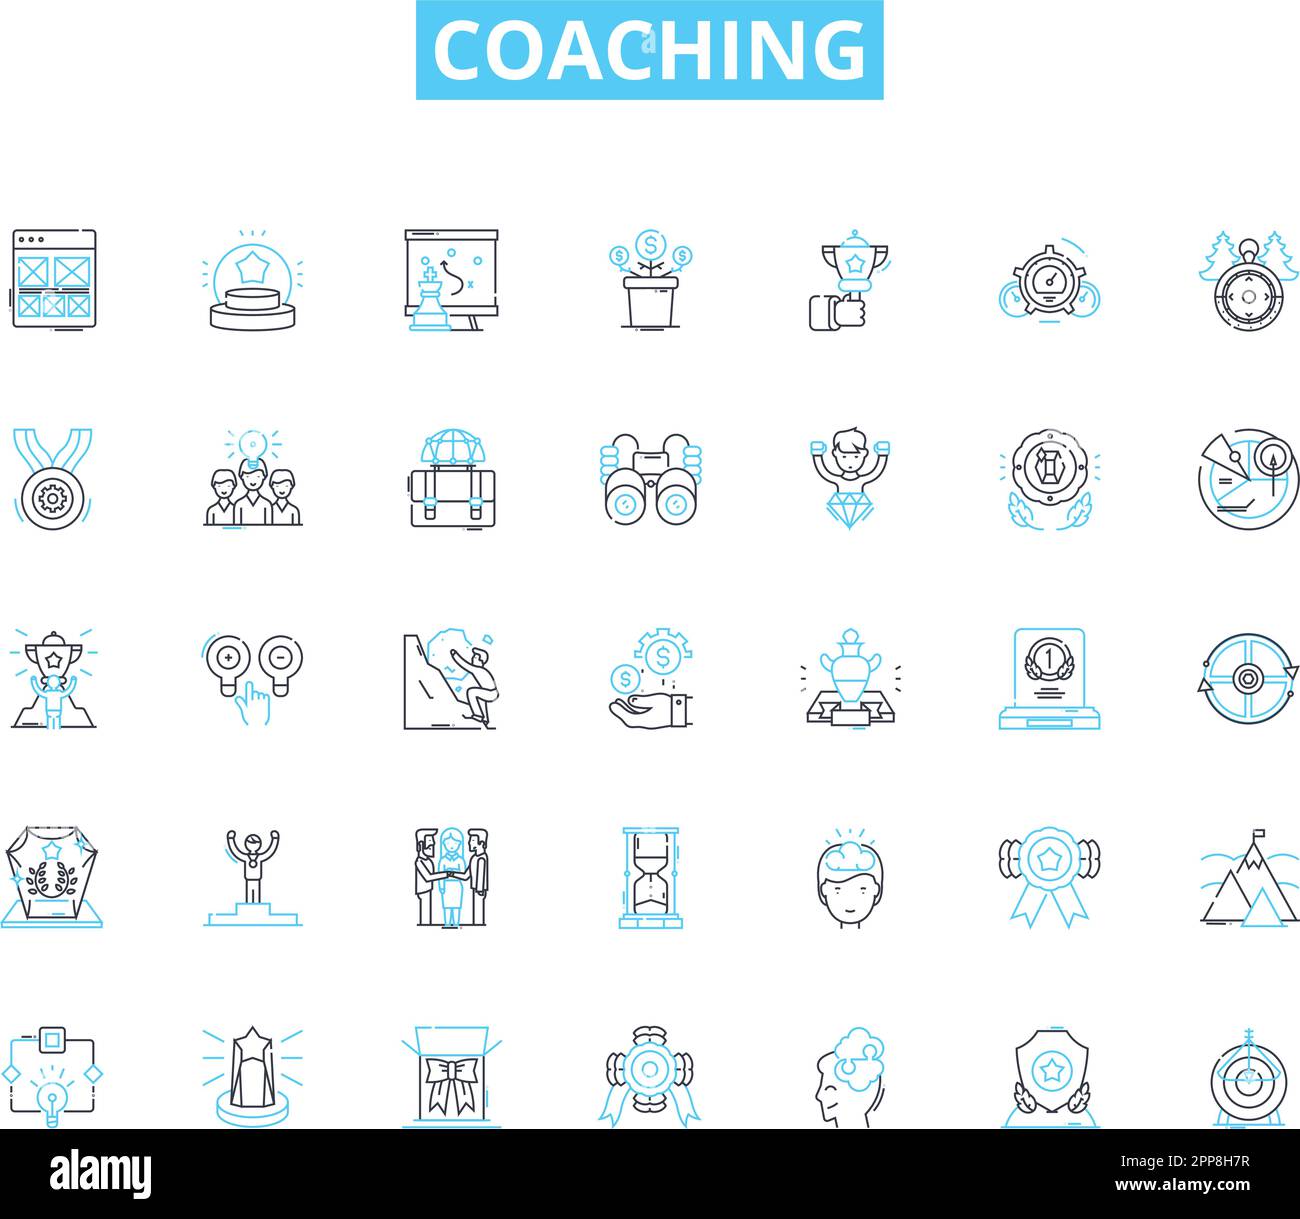 Coaching linear icons set. Mentorship, Guidance, Empowerment, Support, Development, Encouragement, Motivation line vector and concept signs Stock Vector